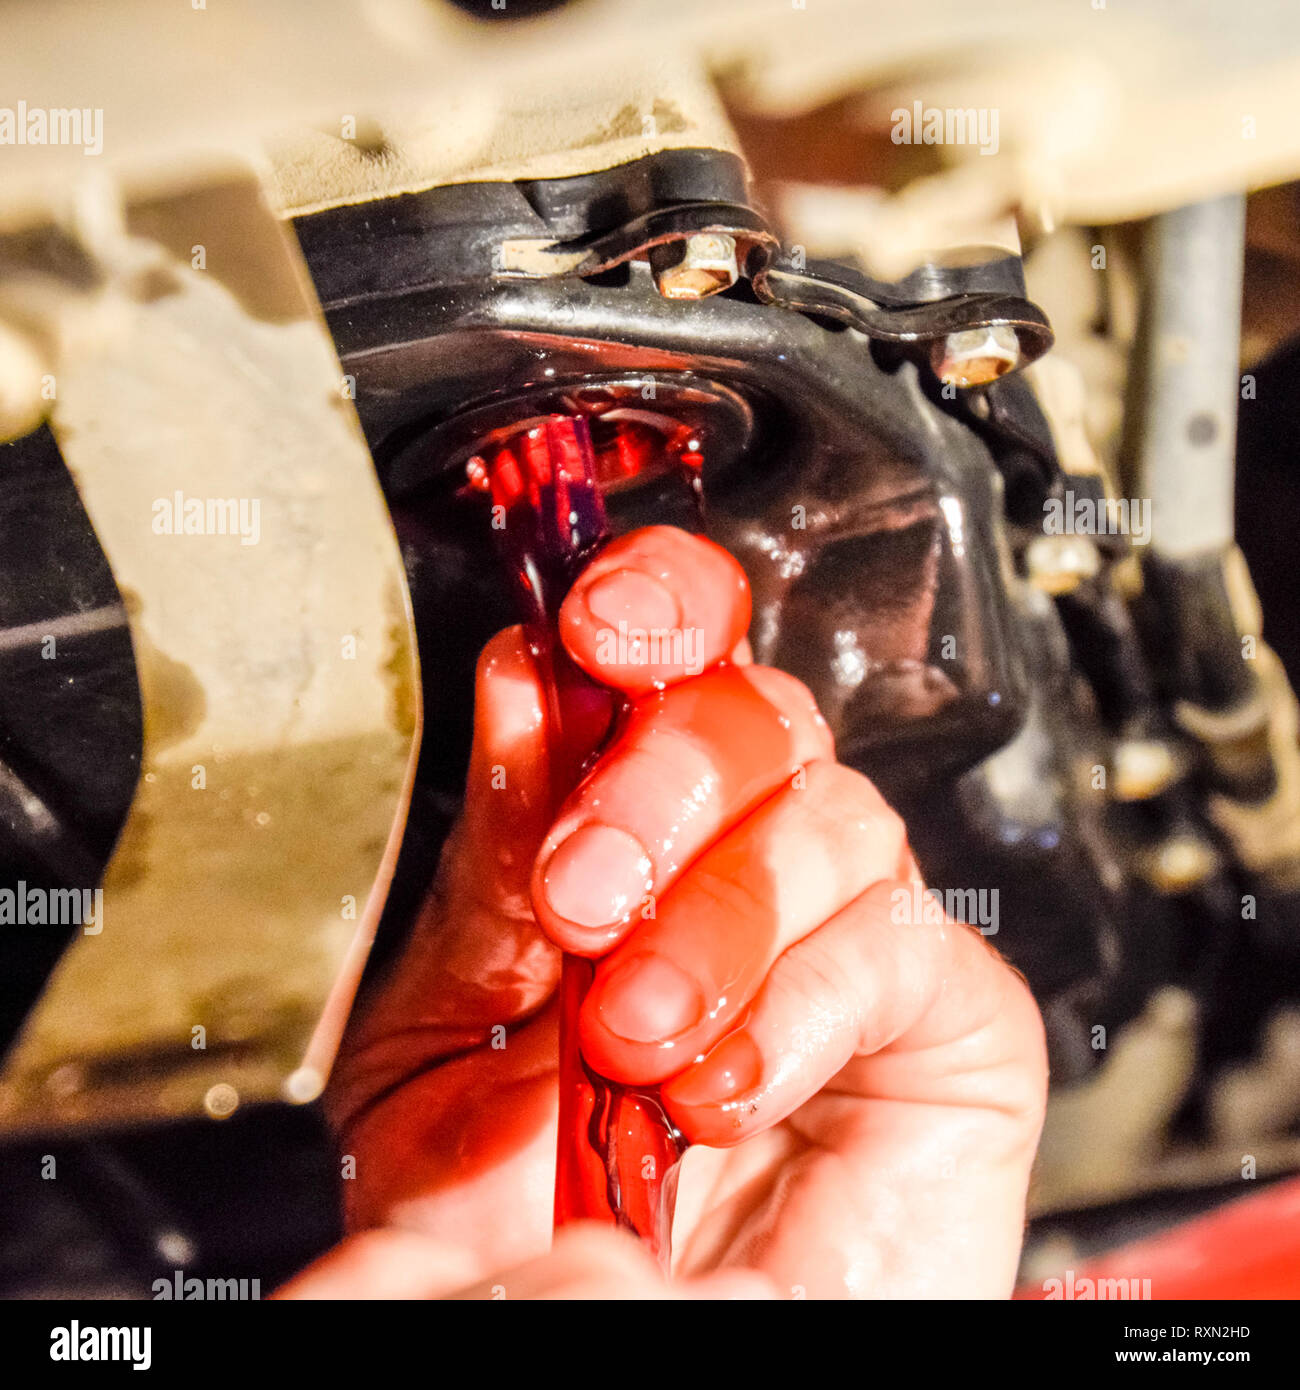 Oil change in automatic transmission. Filling the oil through the hose. Car maintenance station. Red gear oil. The hands of the car mechanic in oil. Stock Photo